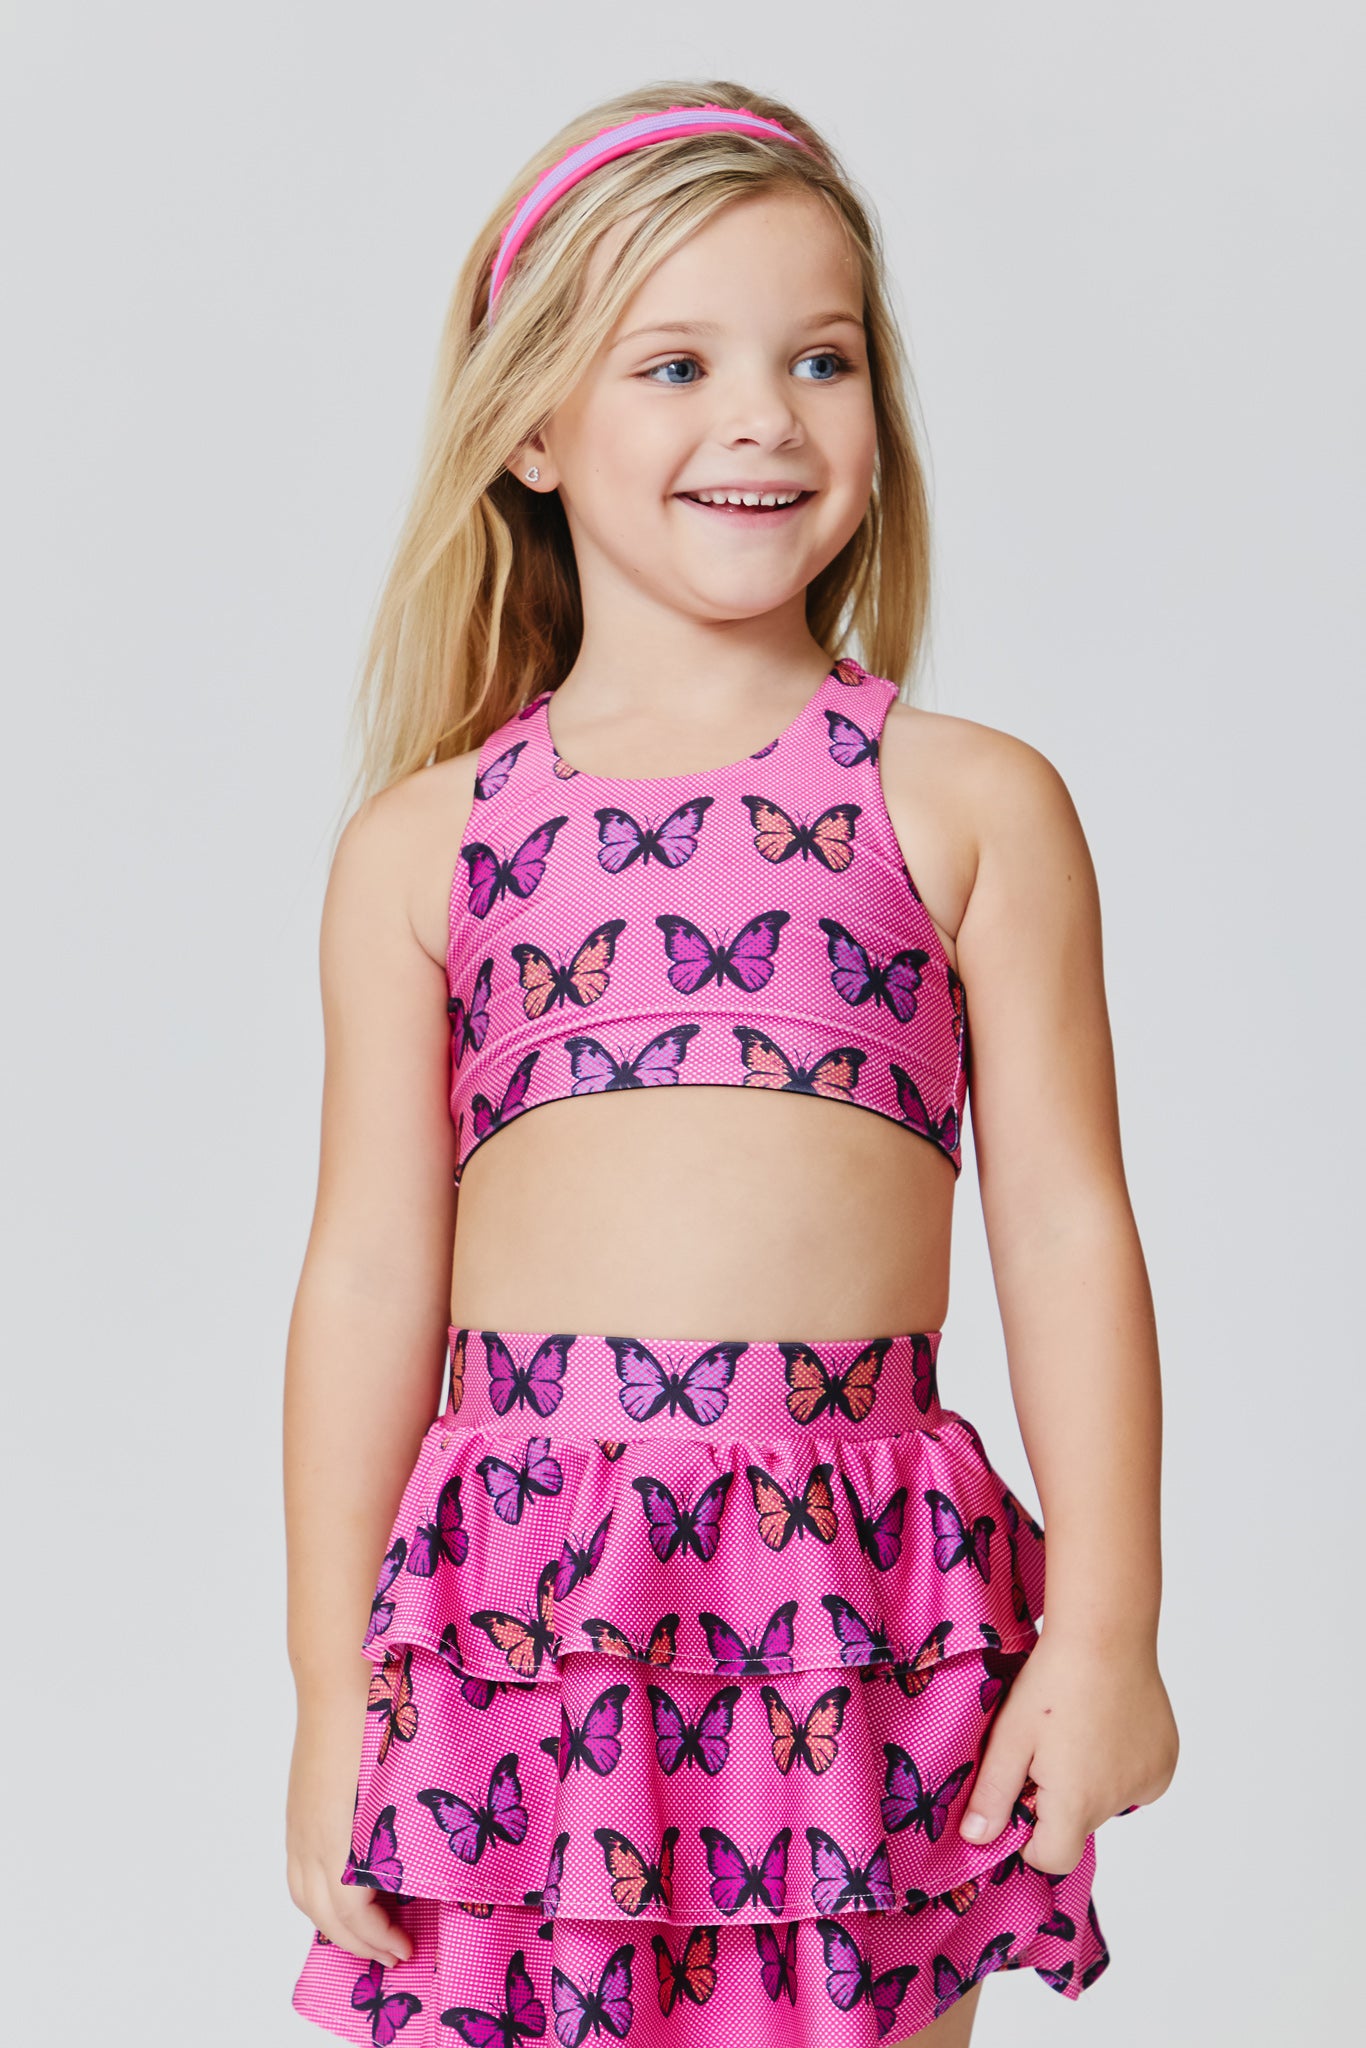 Pink Kids Bras, Shop The Largest Collection